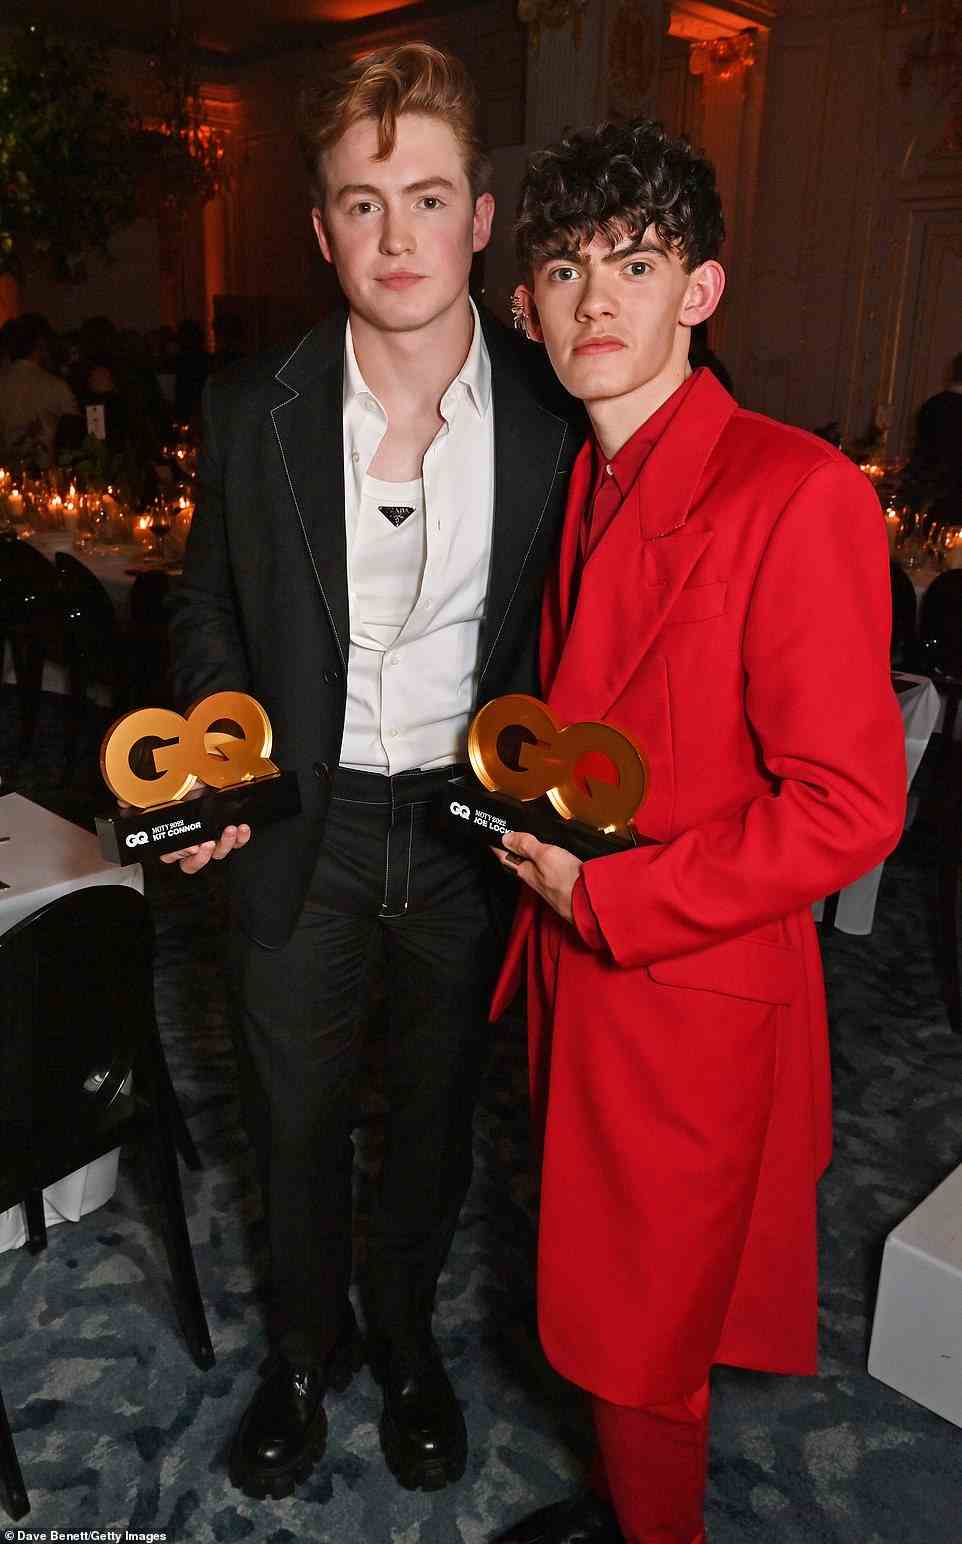 Winners! Heartstopper lead stars Kit Connor and Joe Locks were seen posing with their awards at the dinner